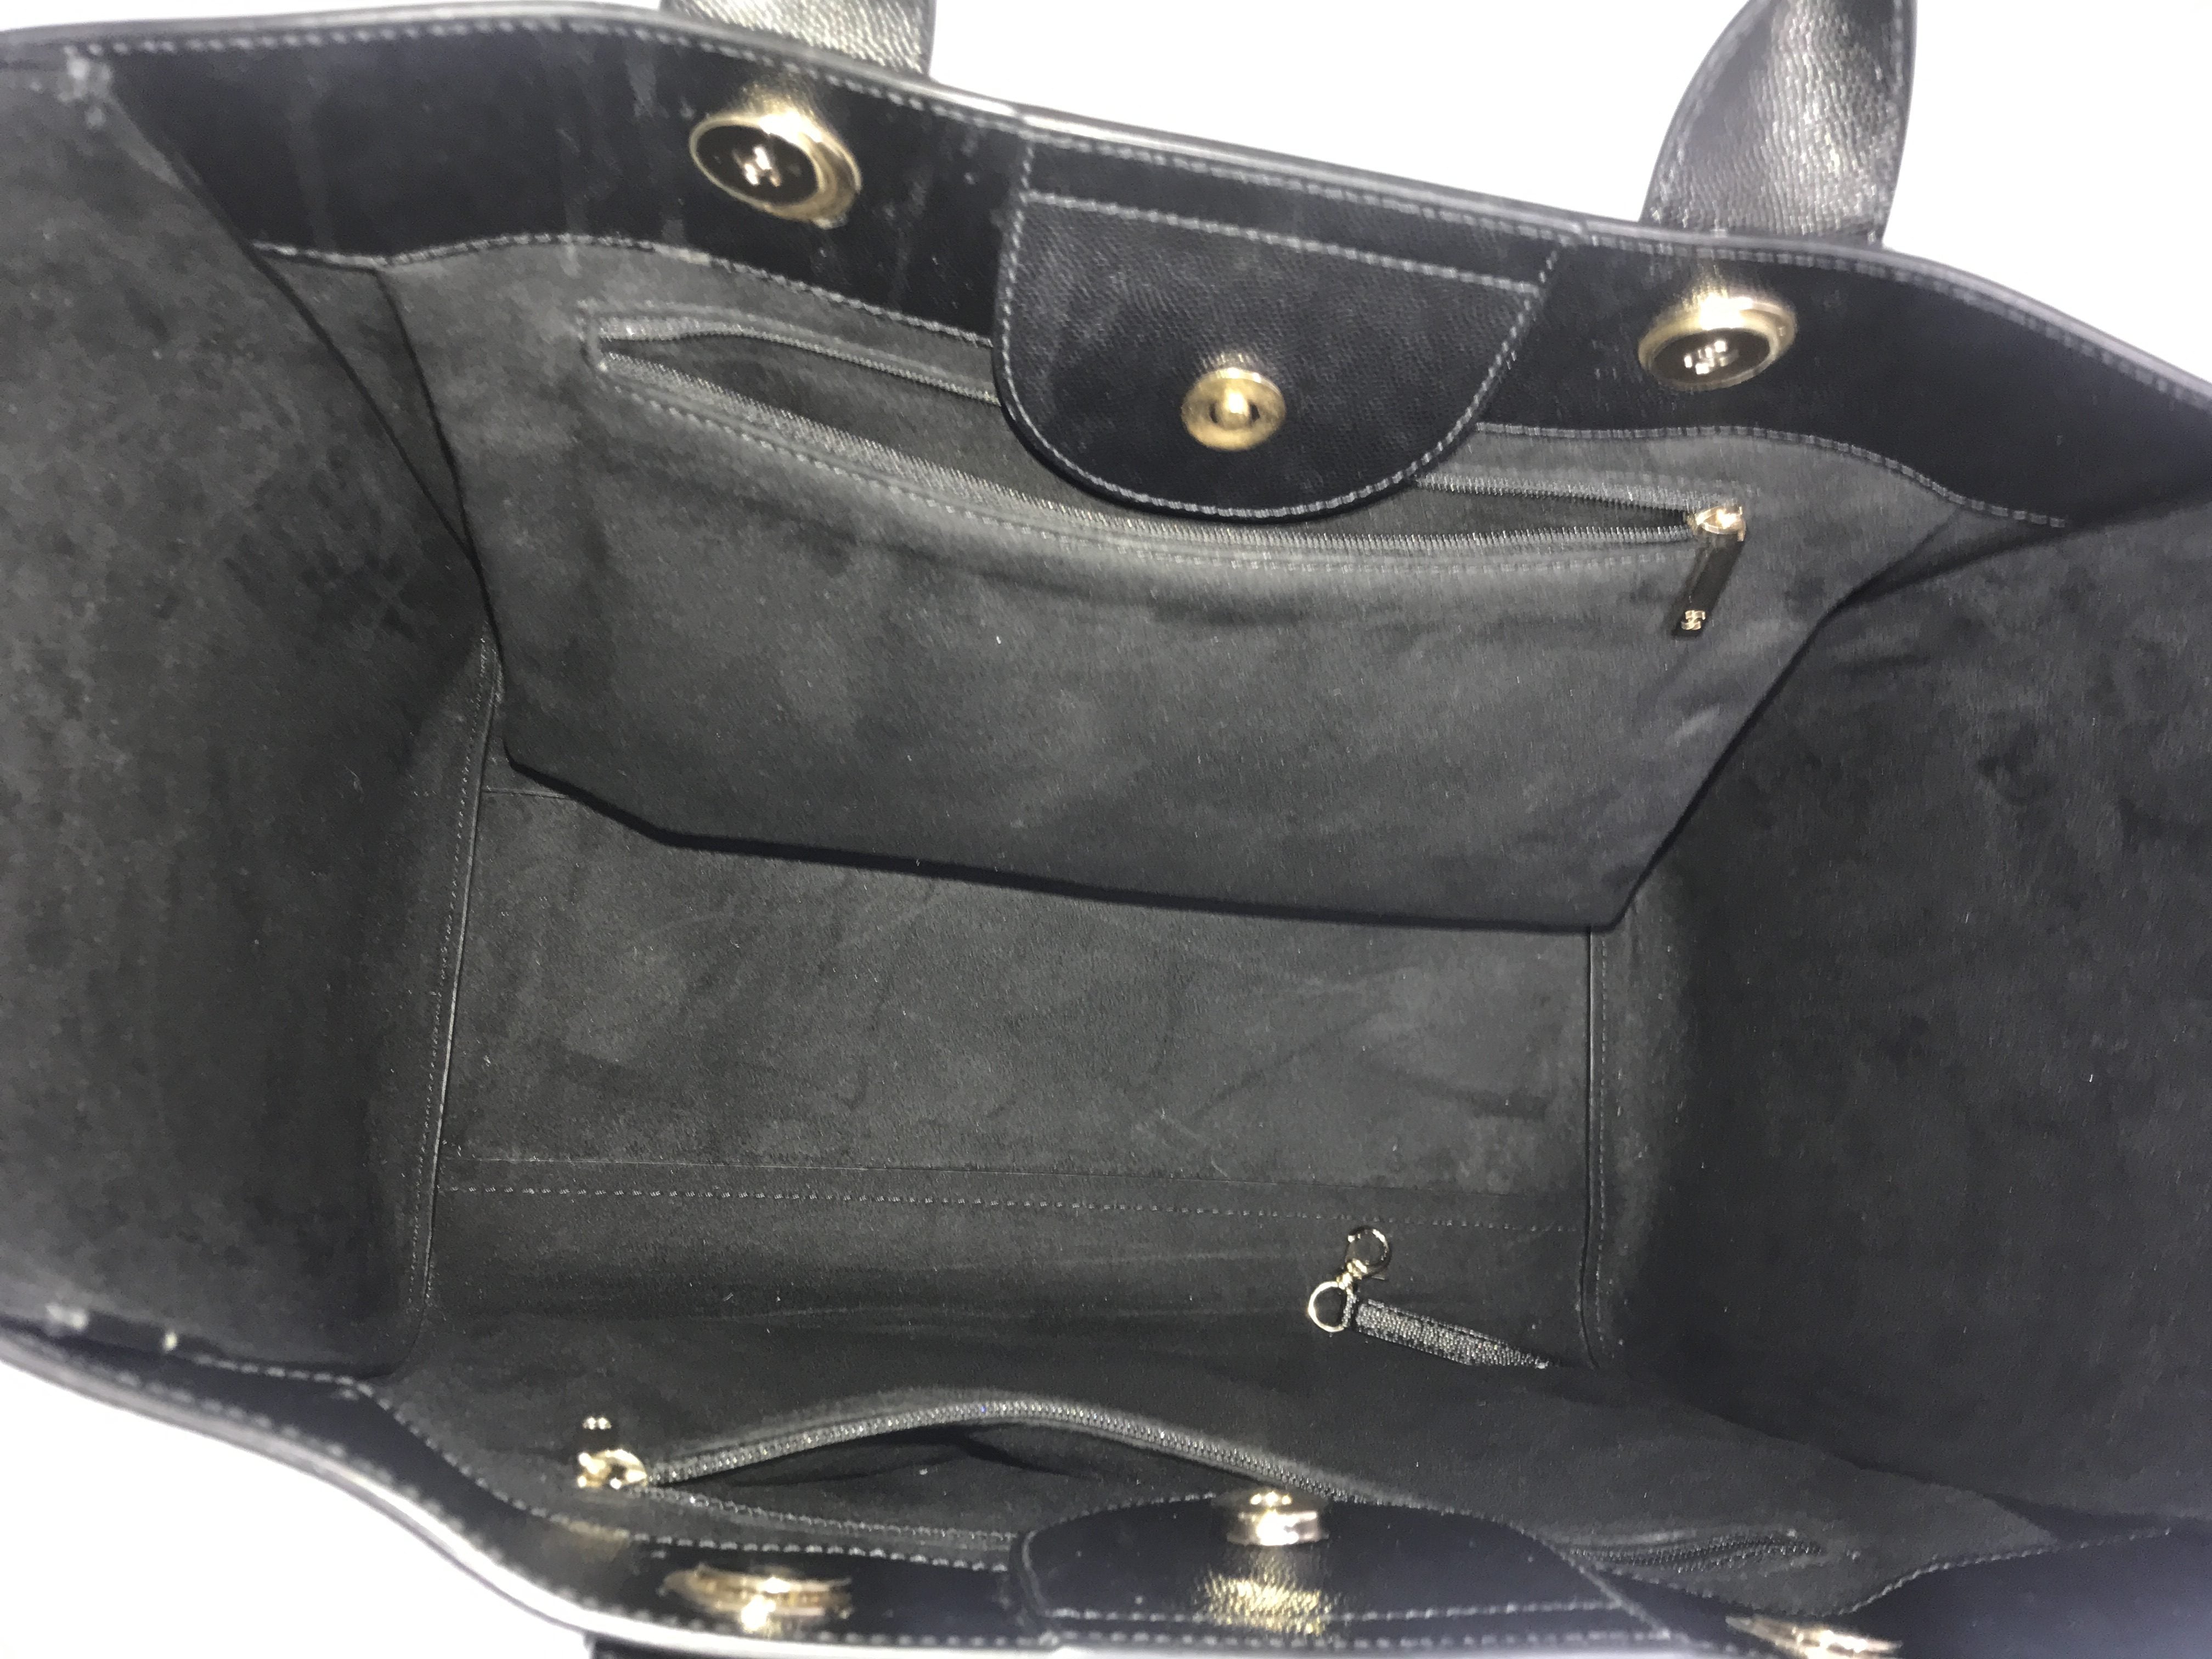 Black Caviar Leather Large Studded Deauville Bag w/GHW